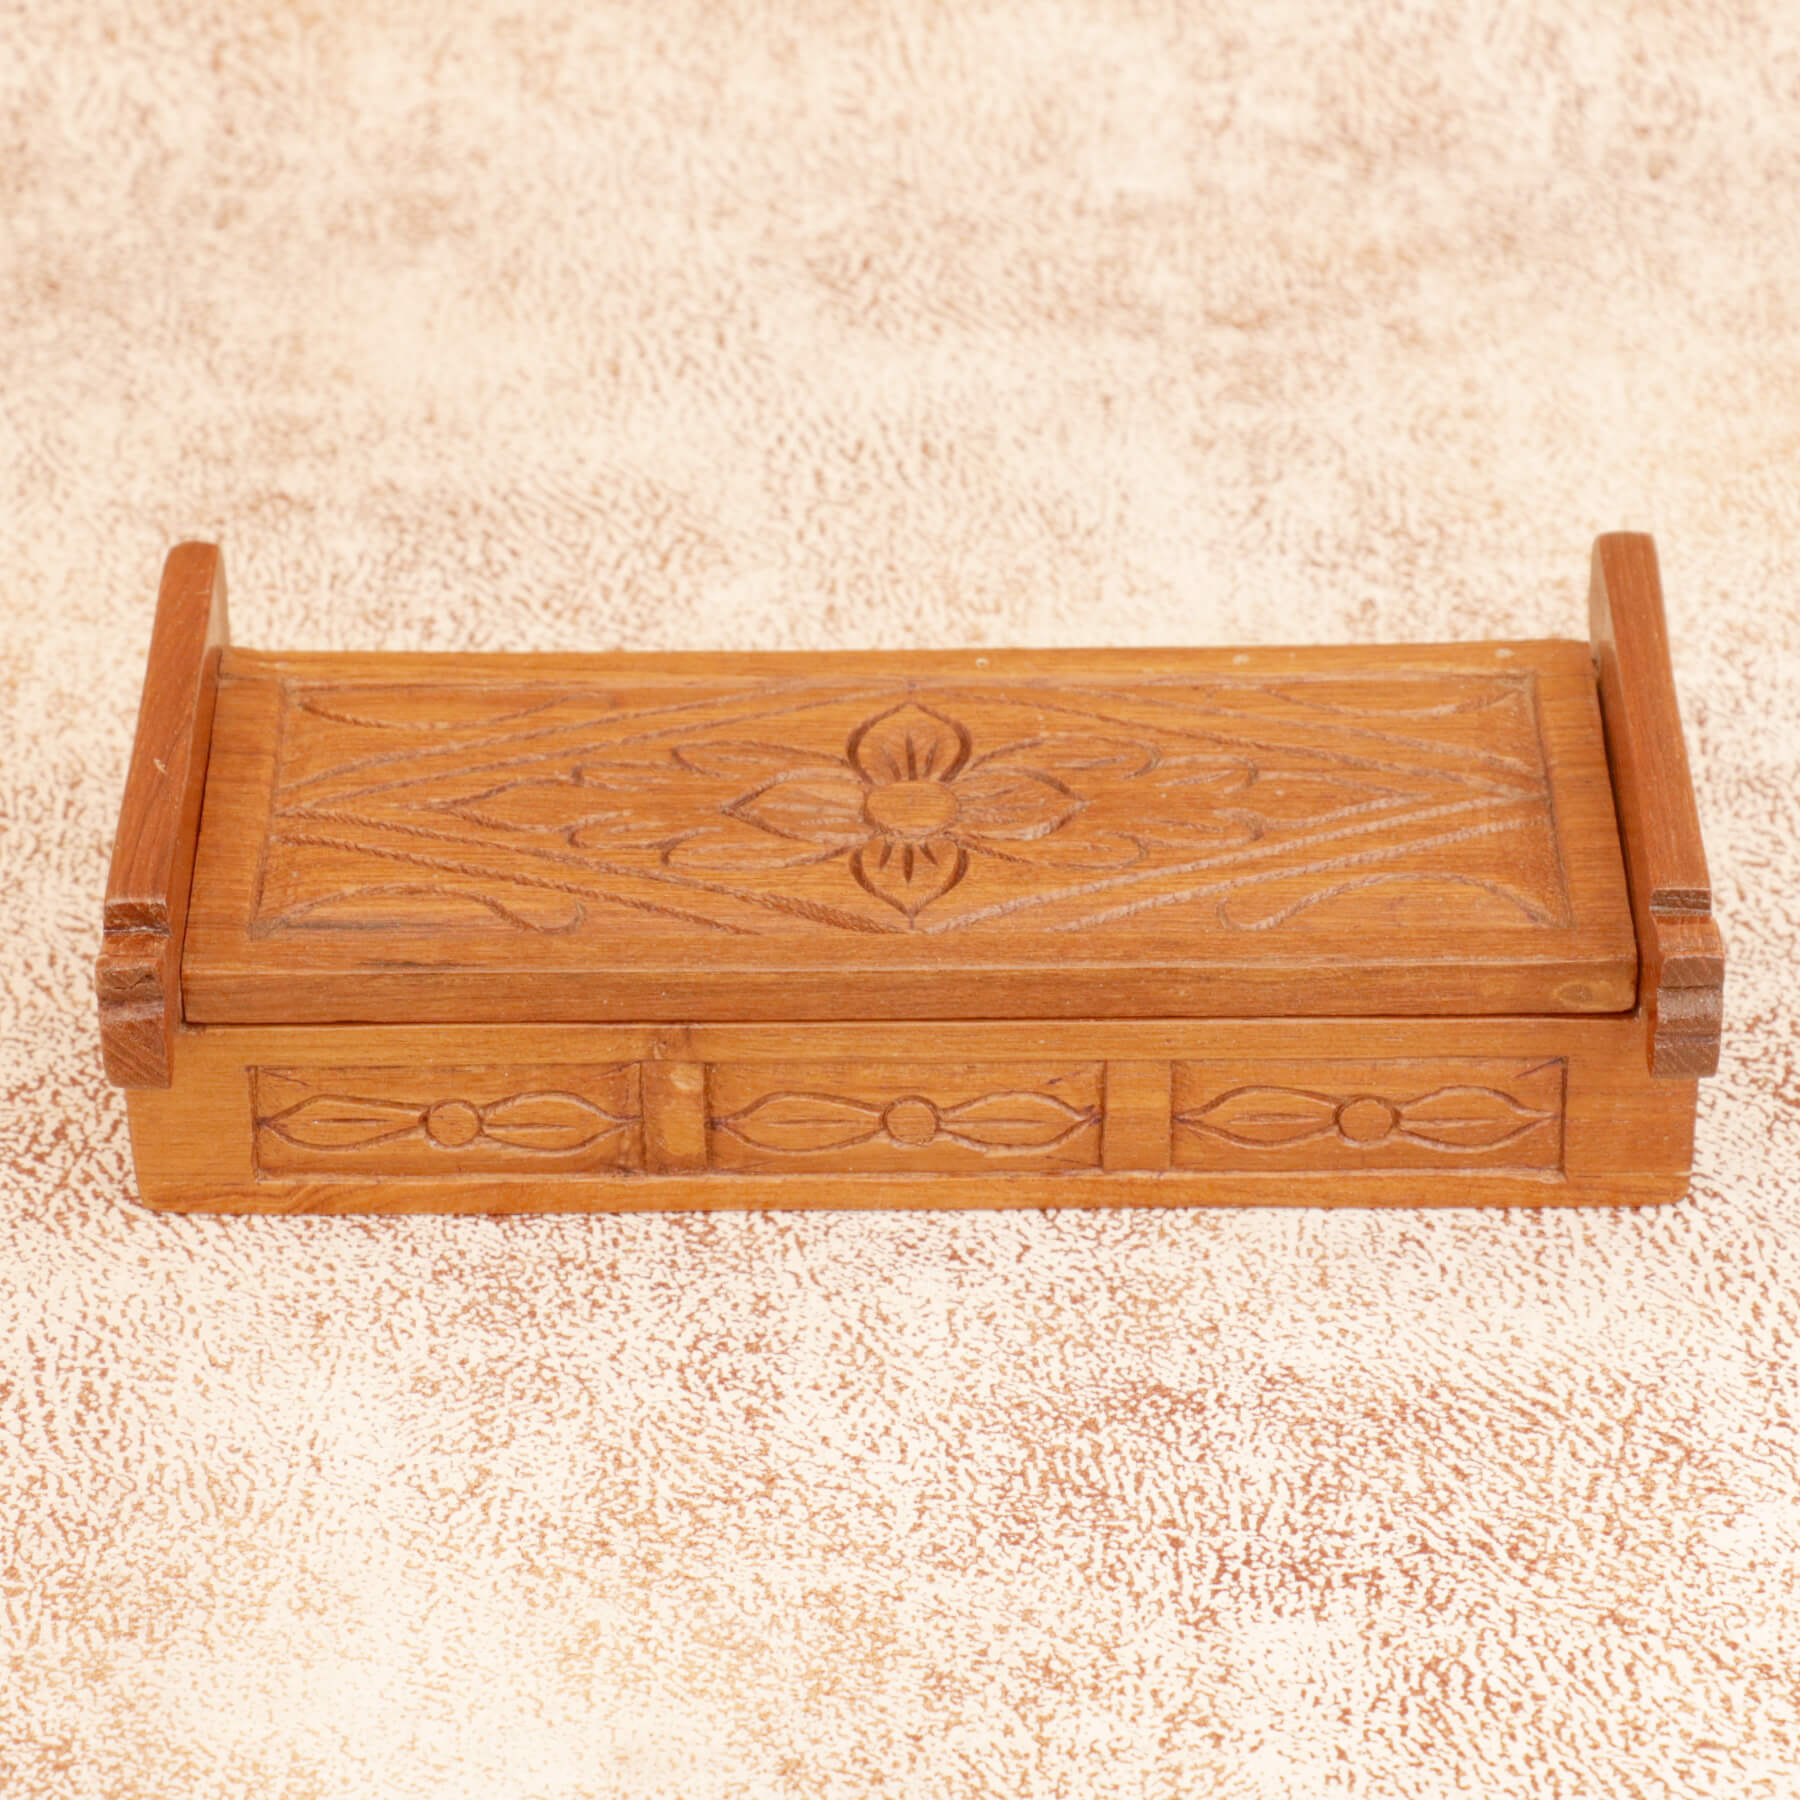 Slim Wooden Carved Box Wooden Box